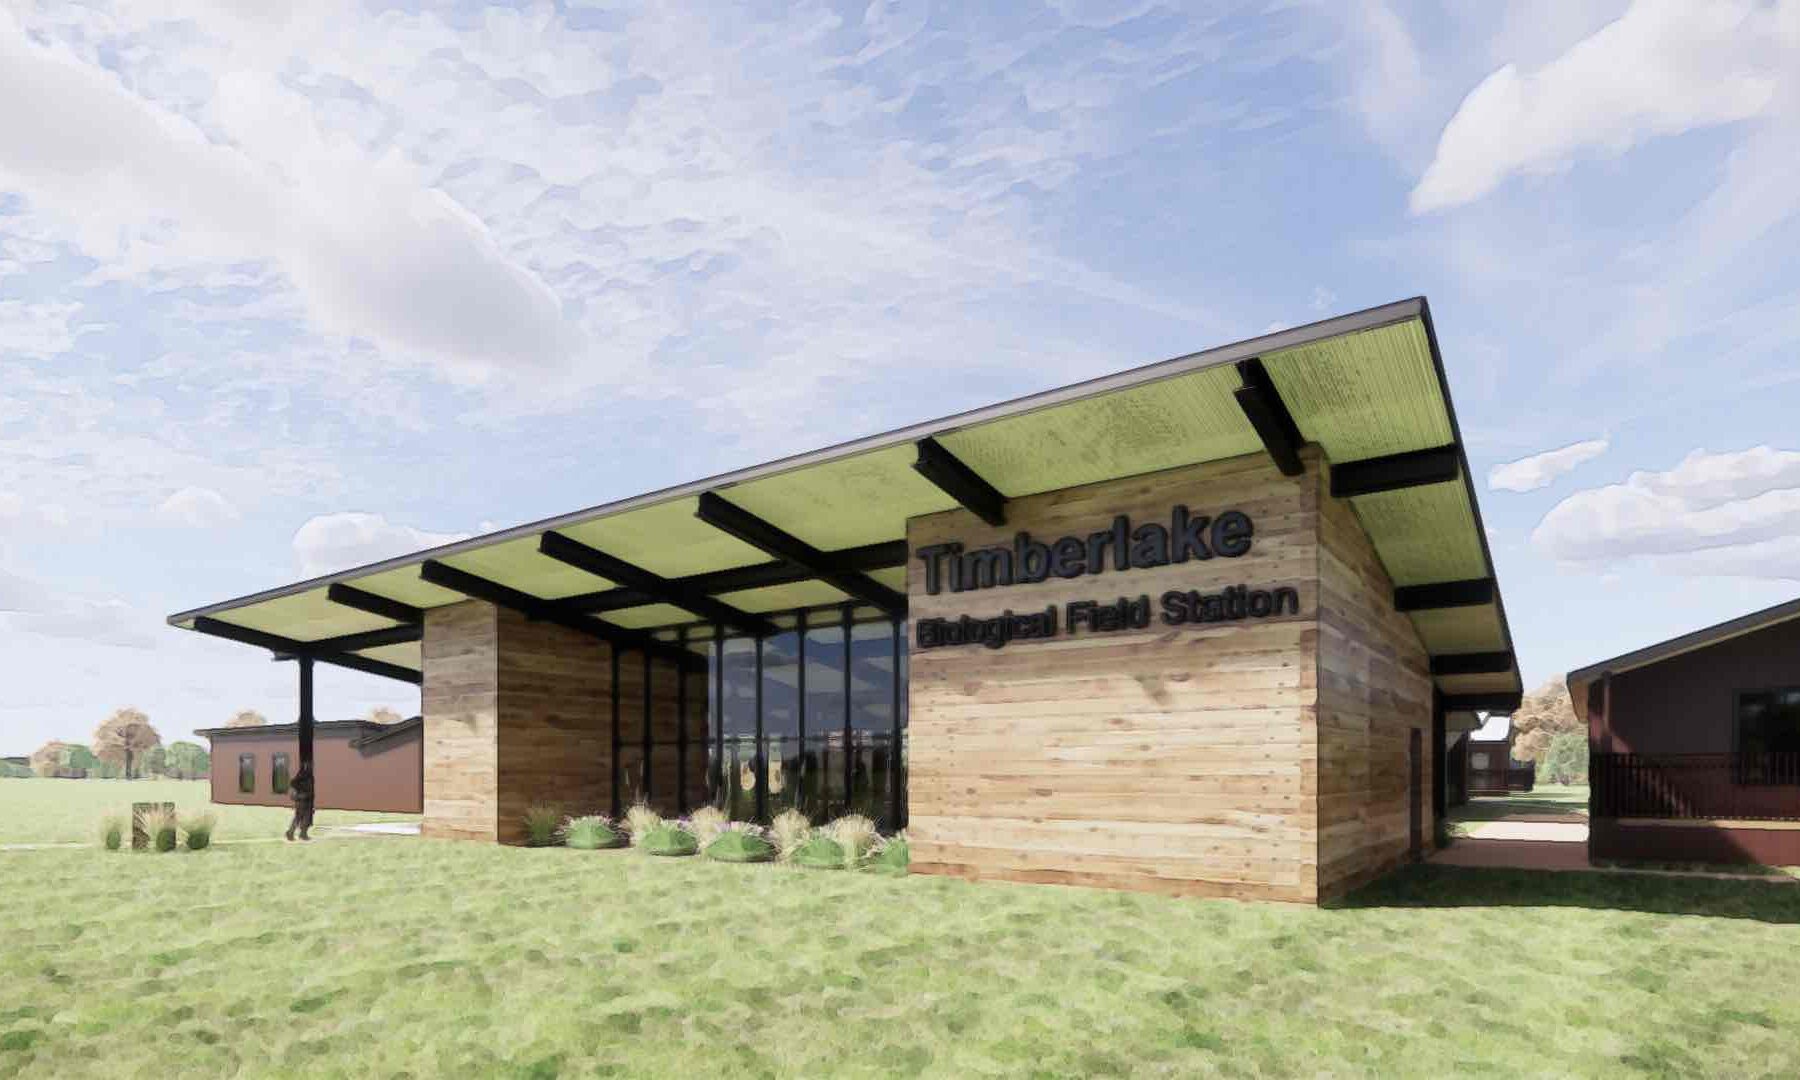 Rendering of the Timberlake Biological Field Station entrance